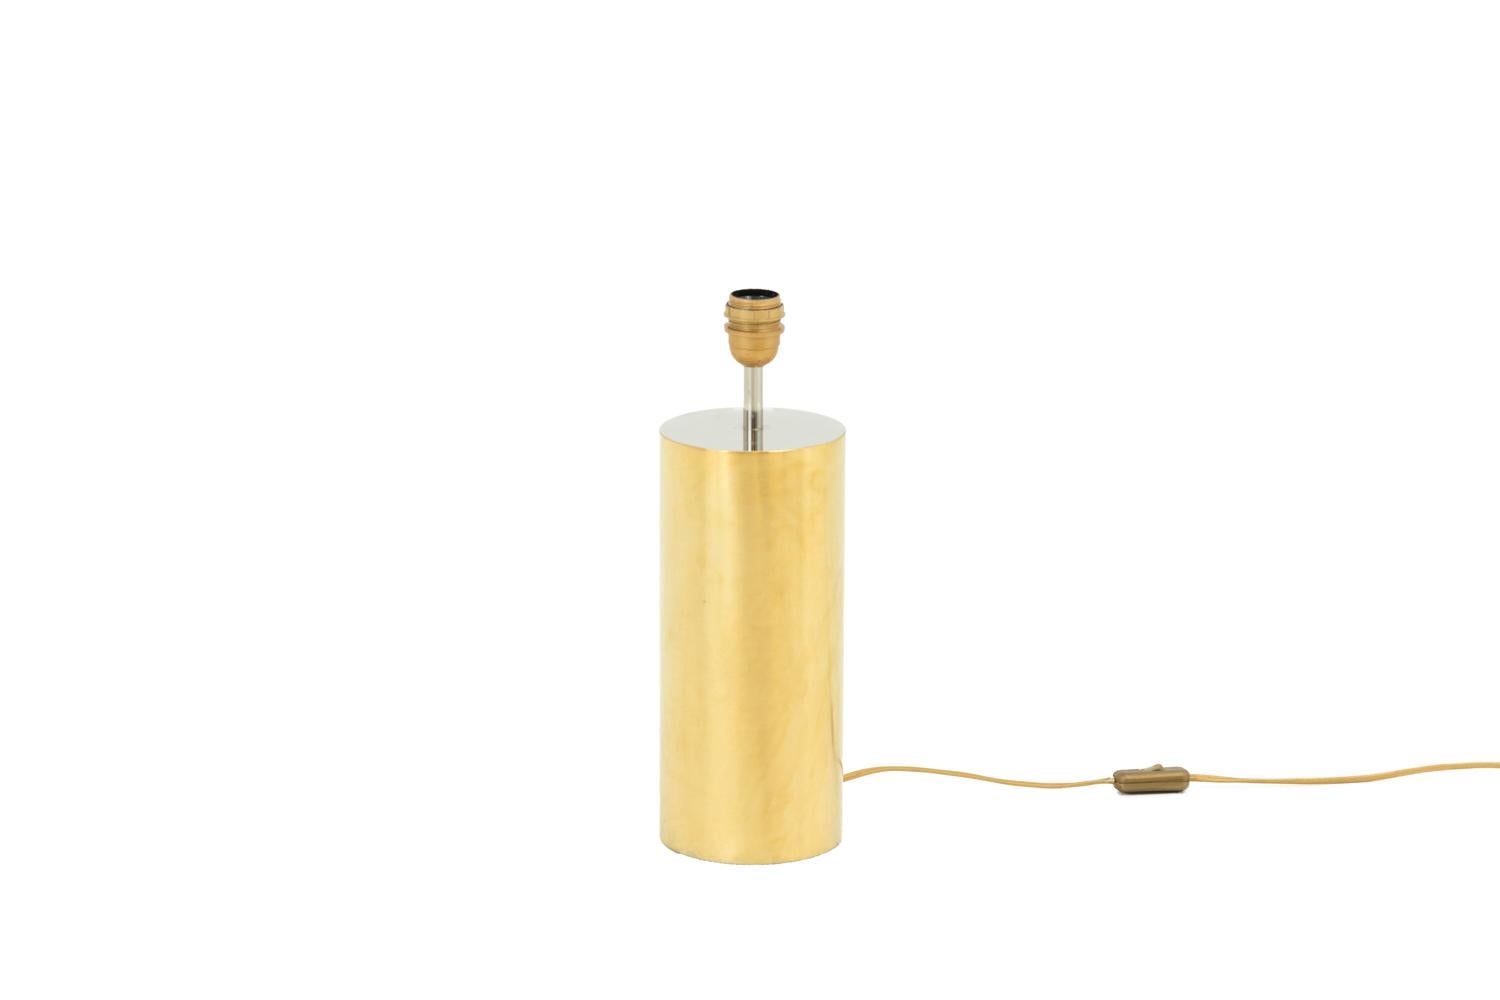 Pair of cylindrical lamps in gilt brushed metal and chromed metal top.

Work realized in the 1970s.

New and functional electrical system.

! The price doesn’t include the lampshade price. However, our workshop can advise you with pleasure and